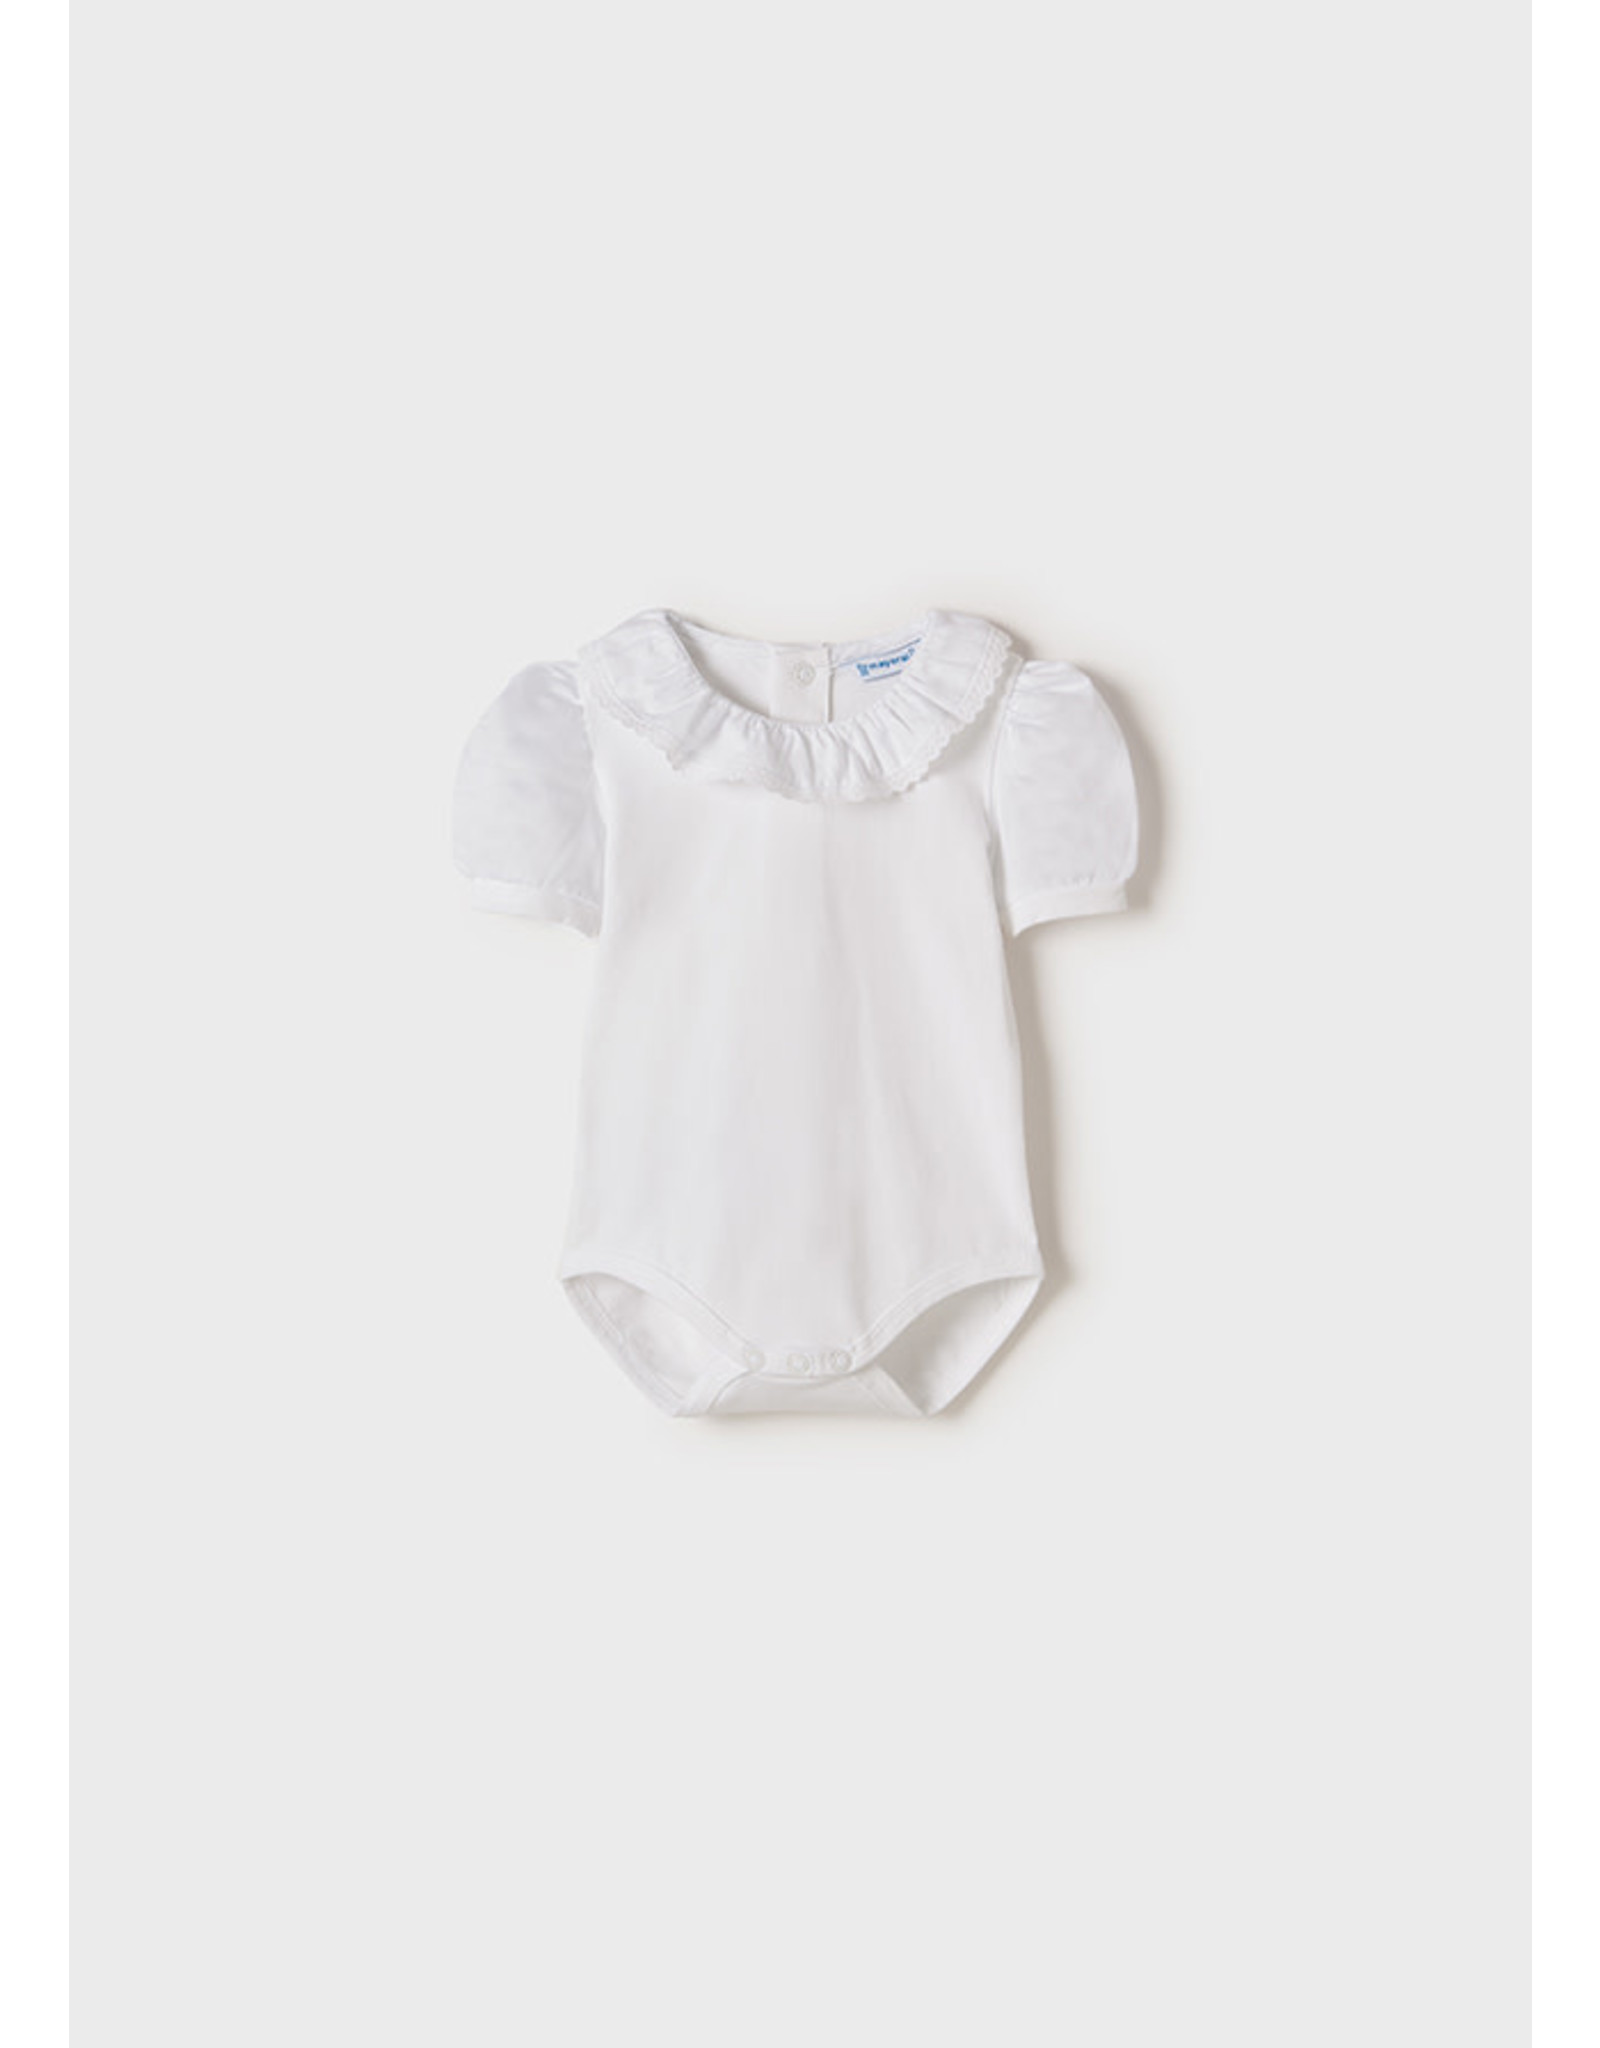 Mayoral White Bodysuit with Frill Neck